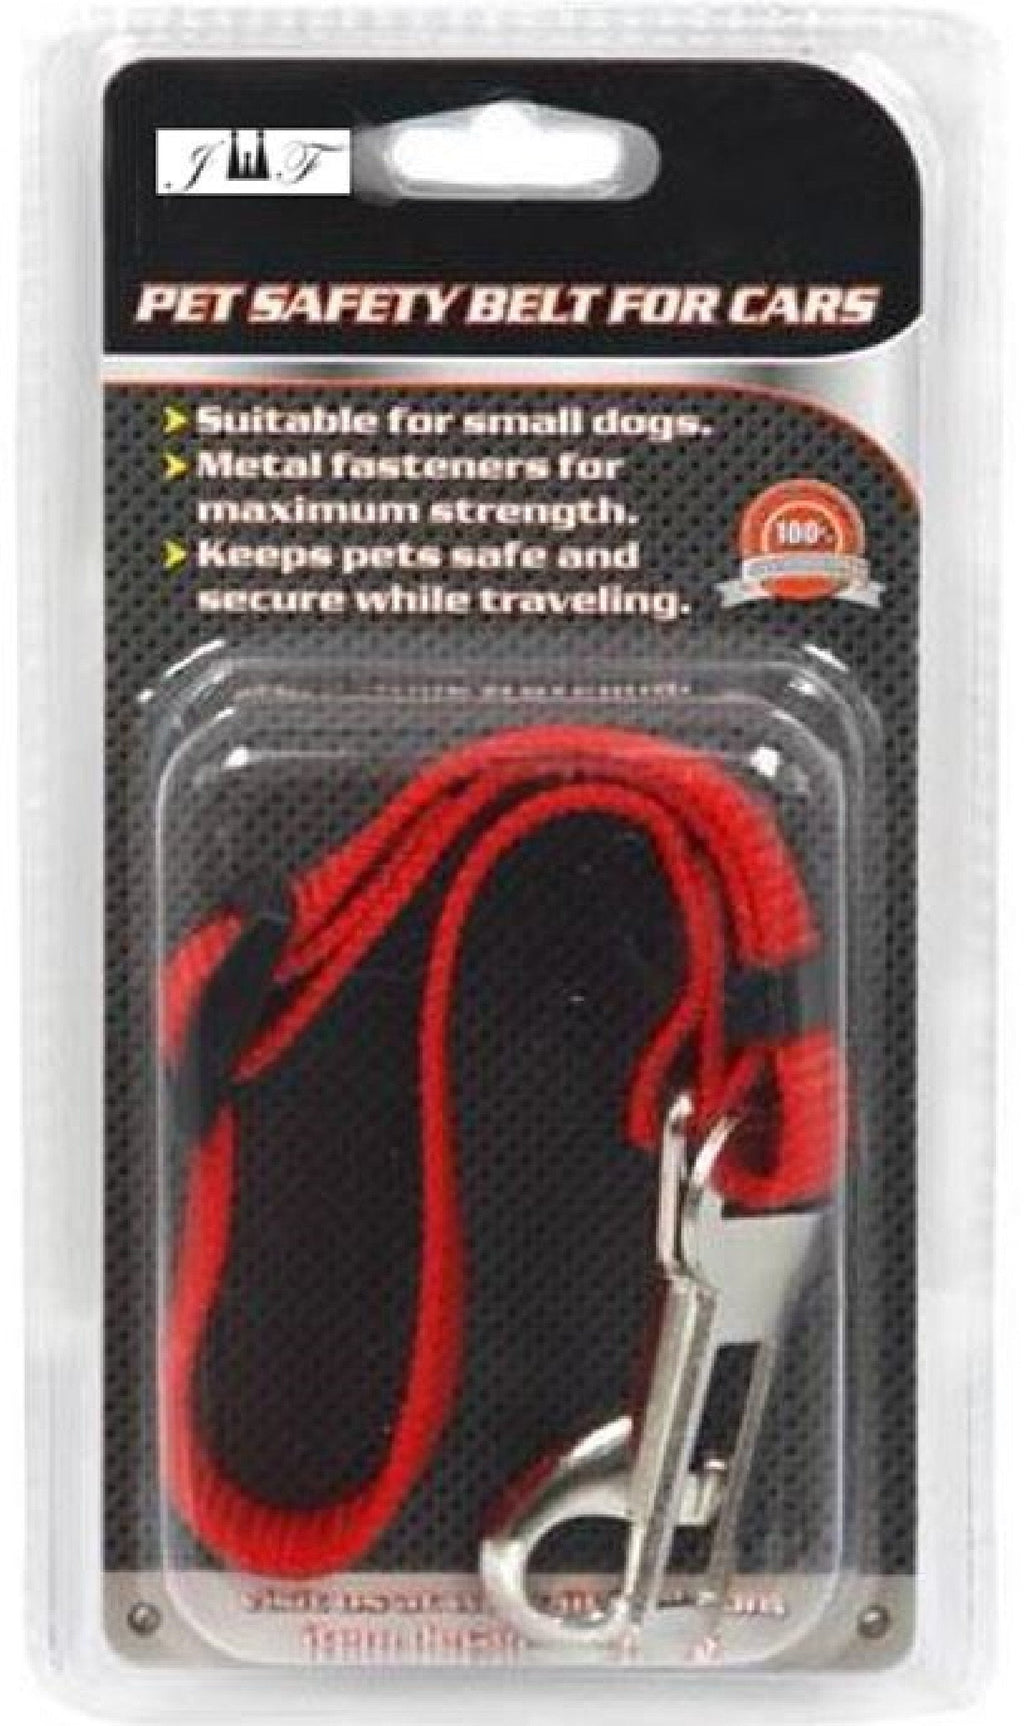 [Australia] - JEWELS FASHION Pet Safety Belt for Cars - Metal Fasteners for Maximum Strength, Suitable for Small Dogs - Keep Pets Safe & Secure While Traveling 